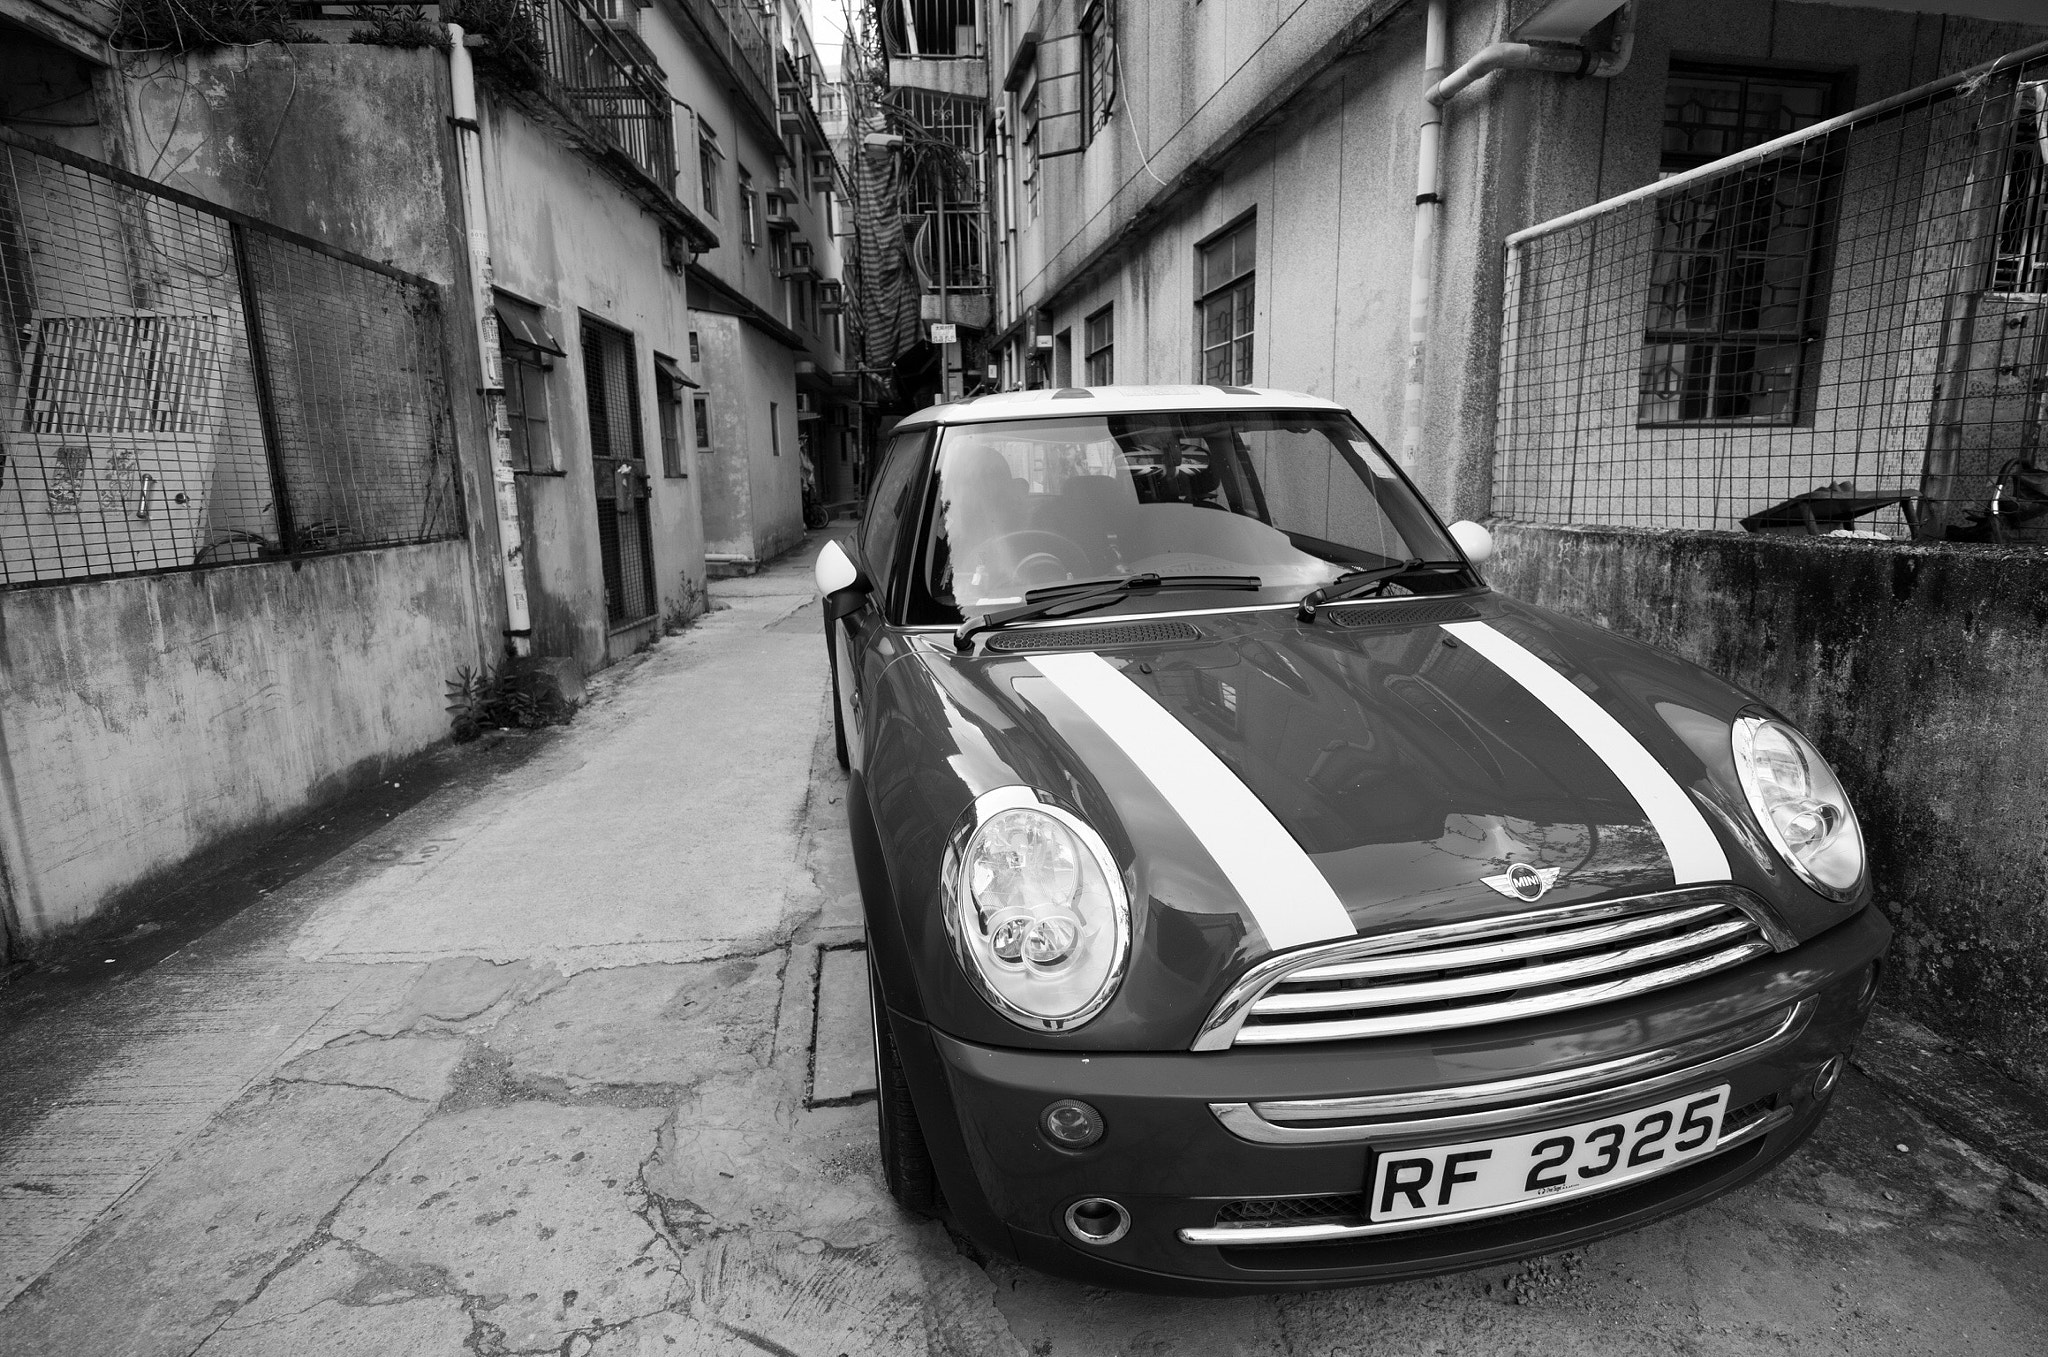 Leica T (Typ 701) + Super-Vario-Elmar-T  1:3.5-4.5 / 11-23 ASPH. sample photo. Old village and a new car ... photography